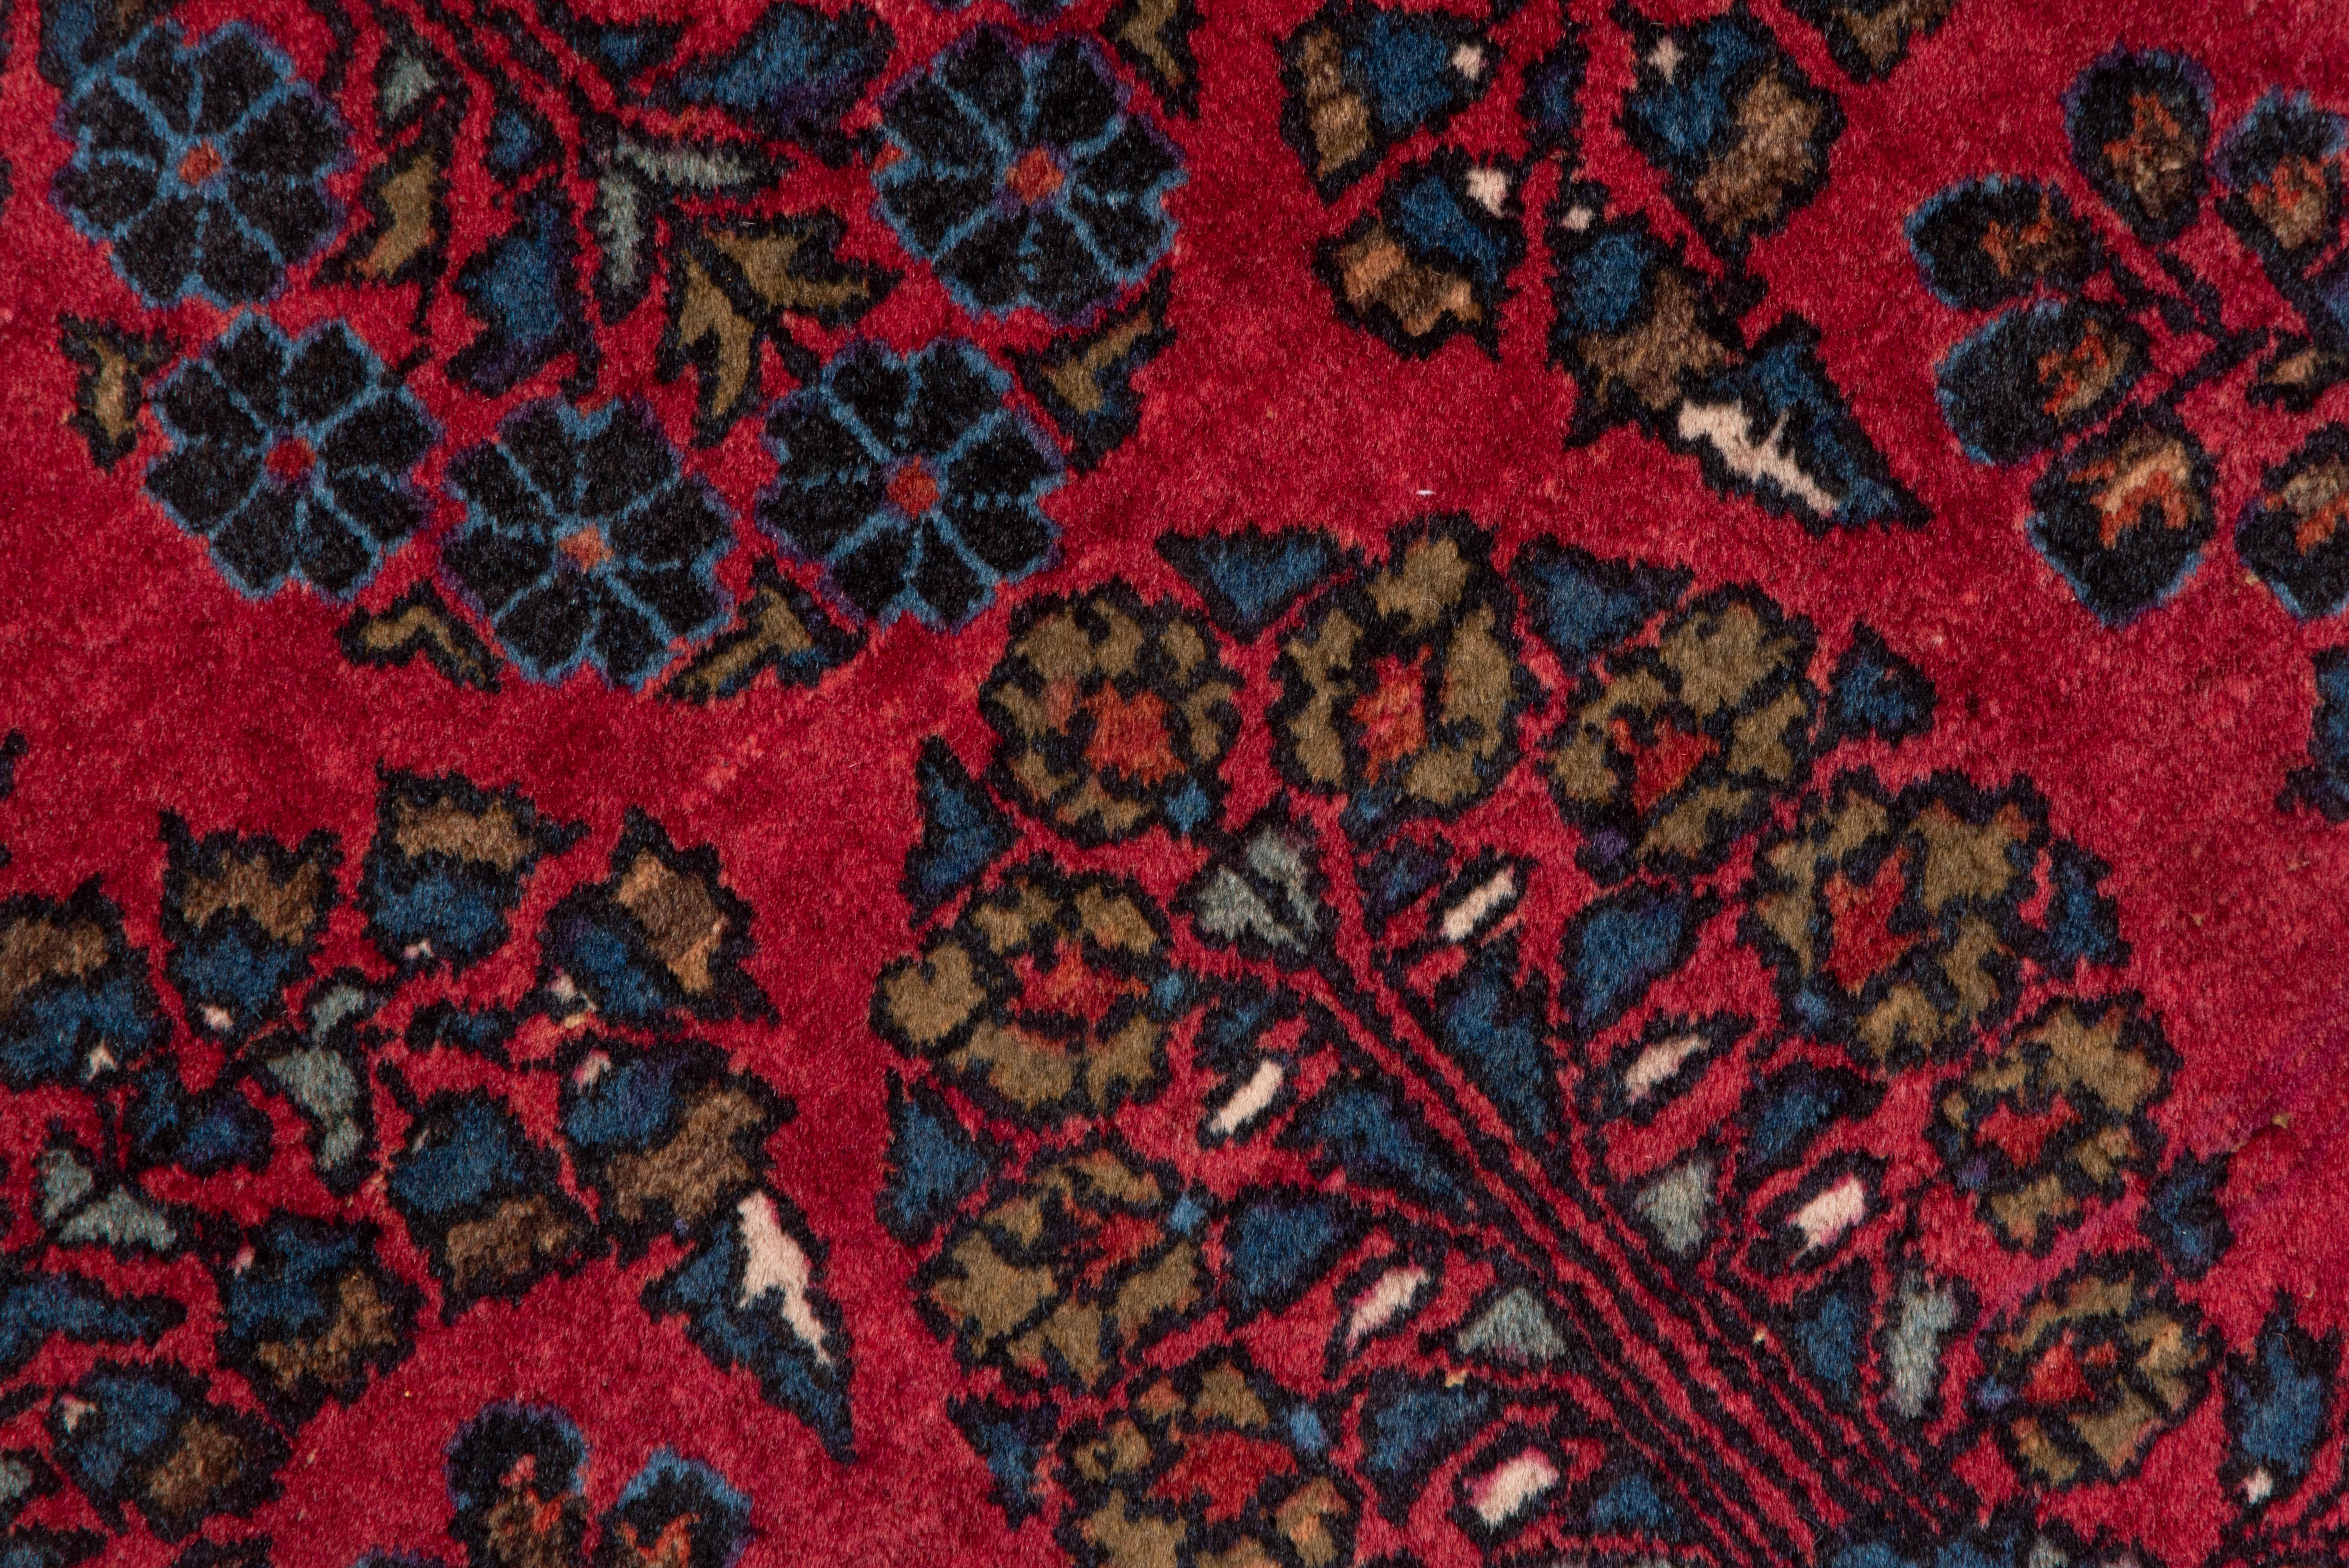 Mid-20th Century Persian Sarouk Rug, Red Field, Medium Pile, Blue Acents In Good Condition For Sale In New York, NY